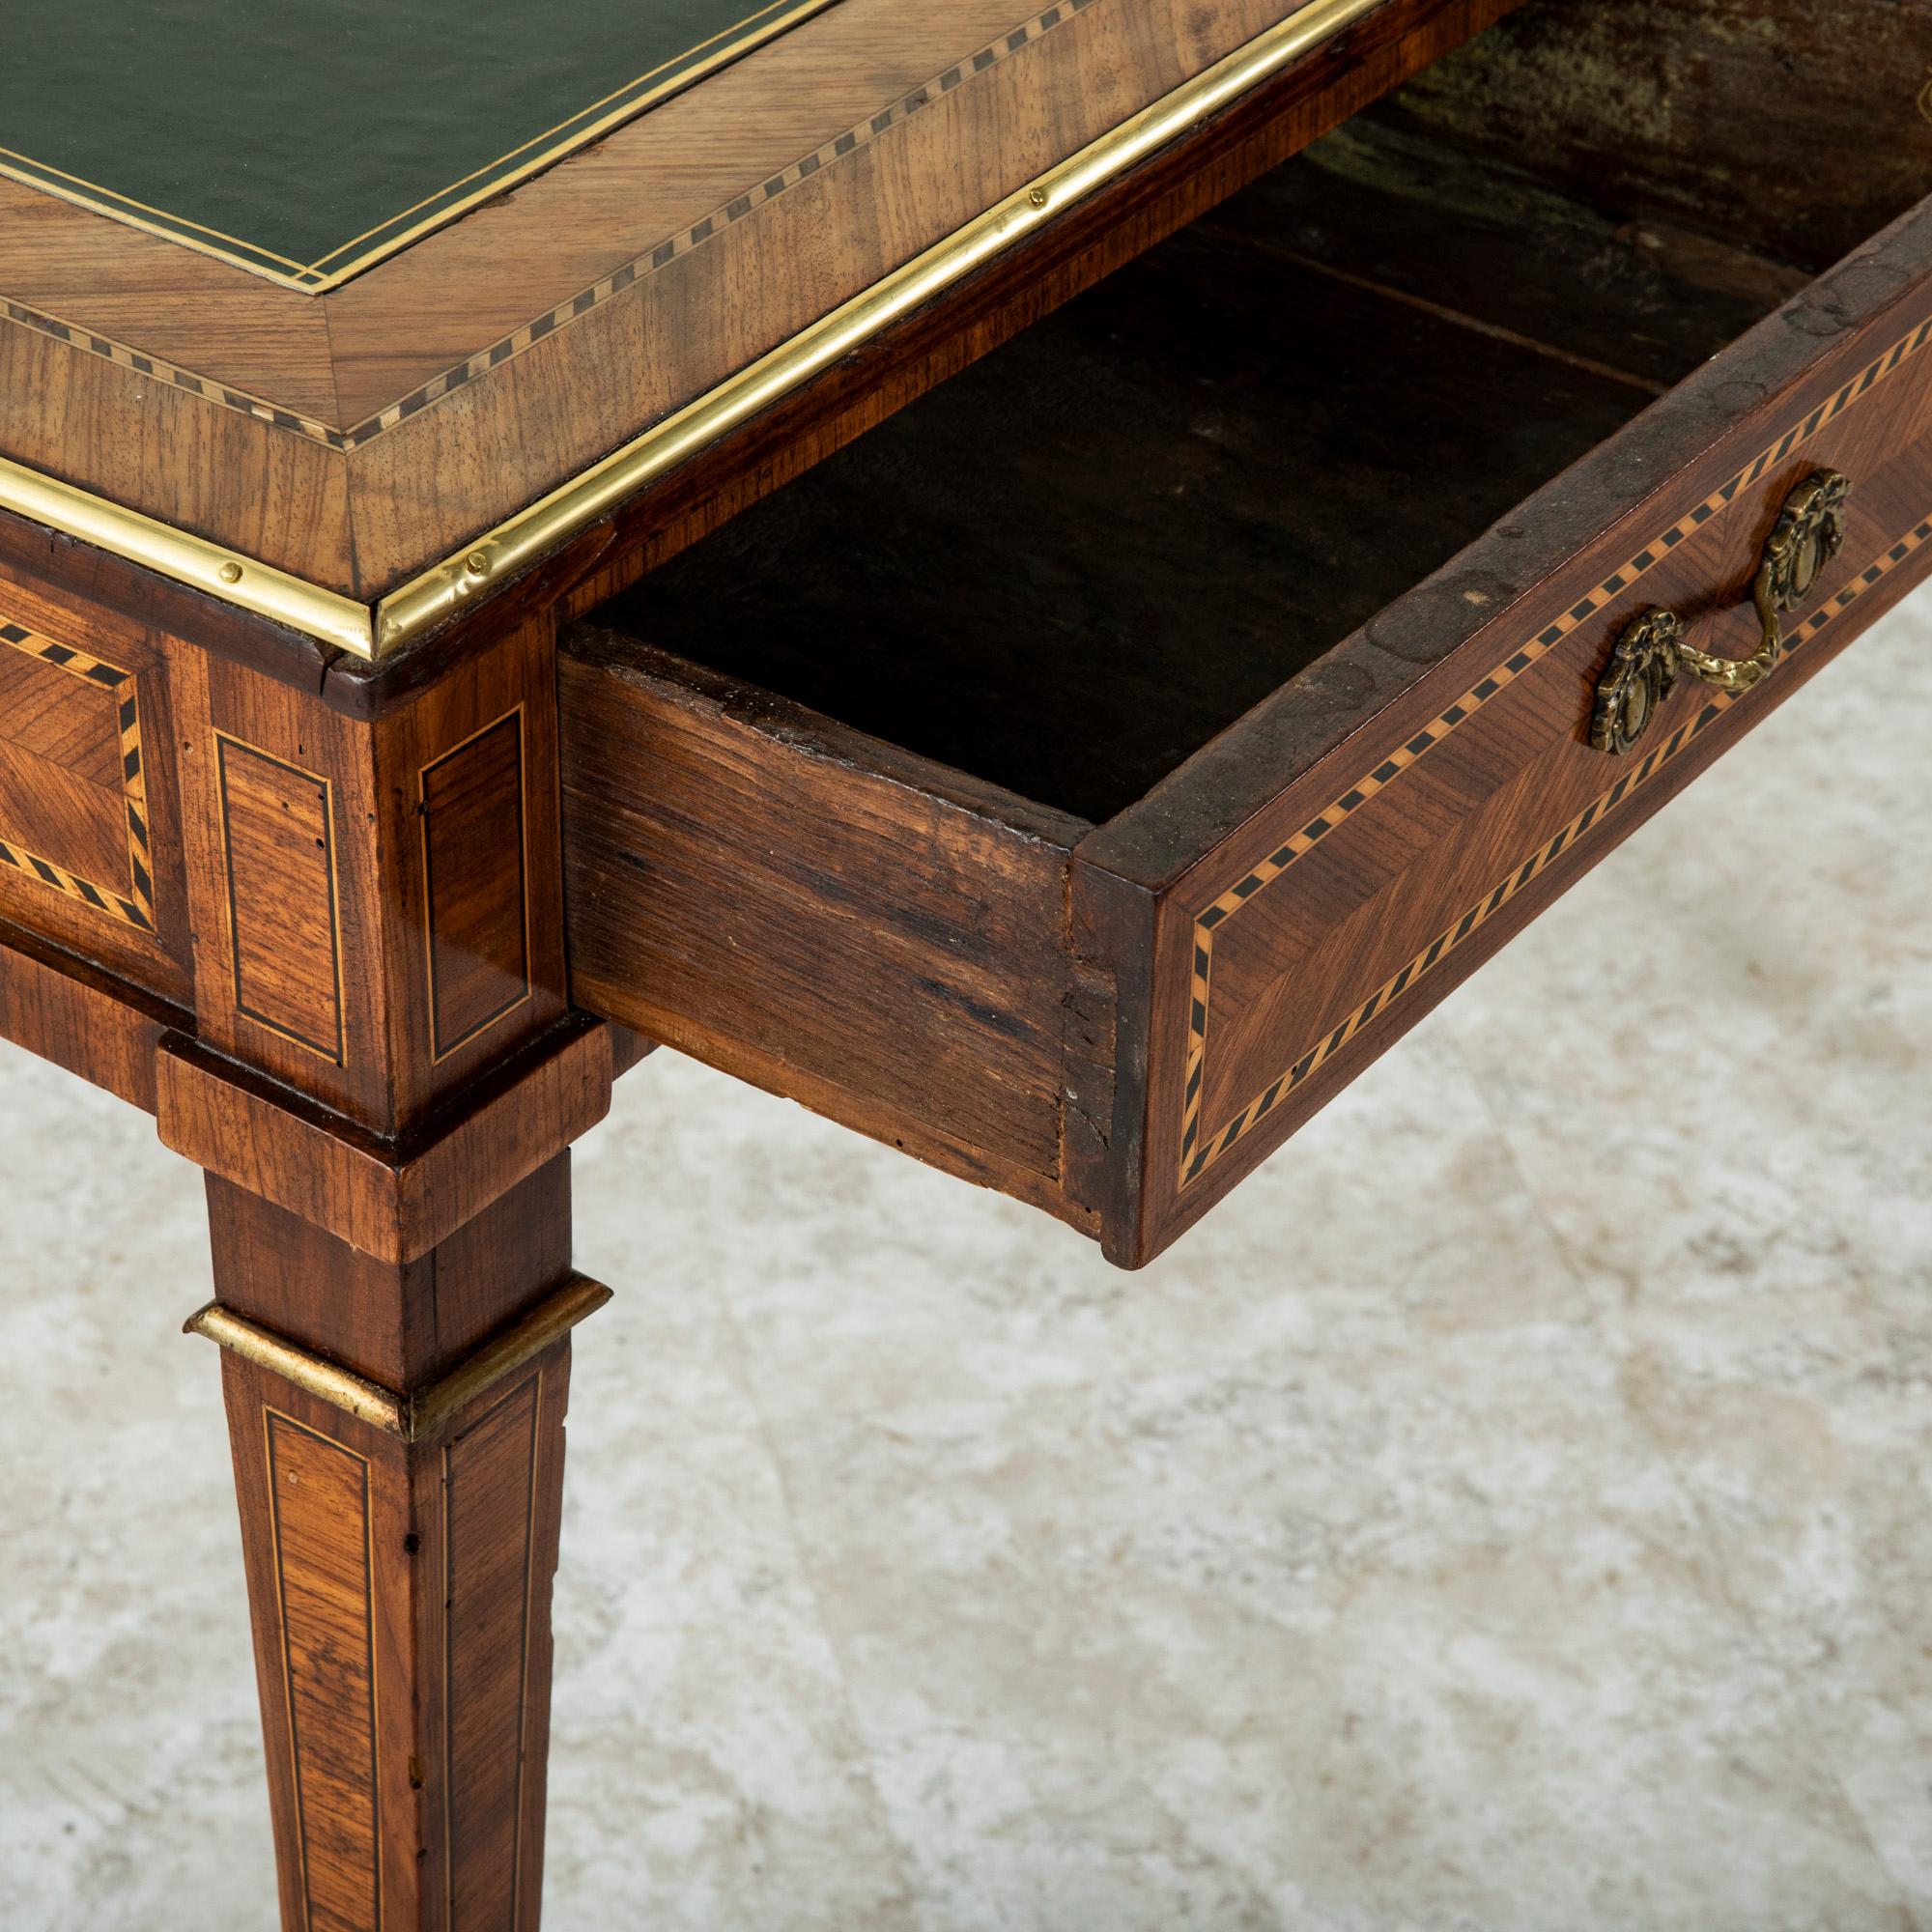 Late 18th Century French Louis XVI Period Marquetry Desk with Leather Top 3